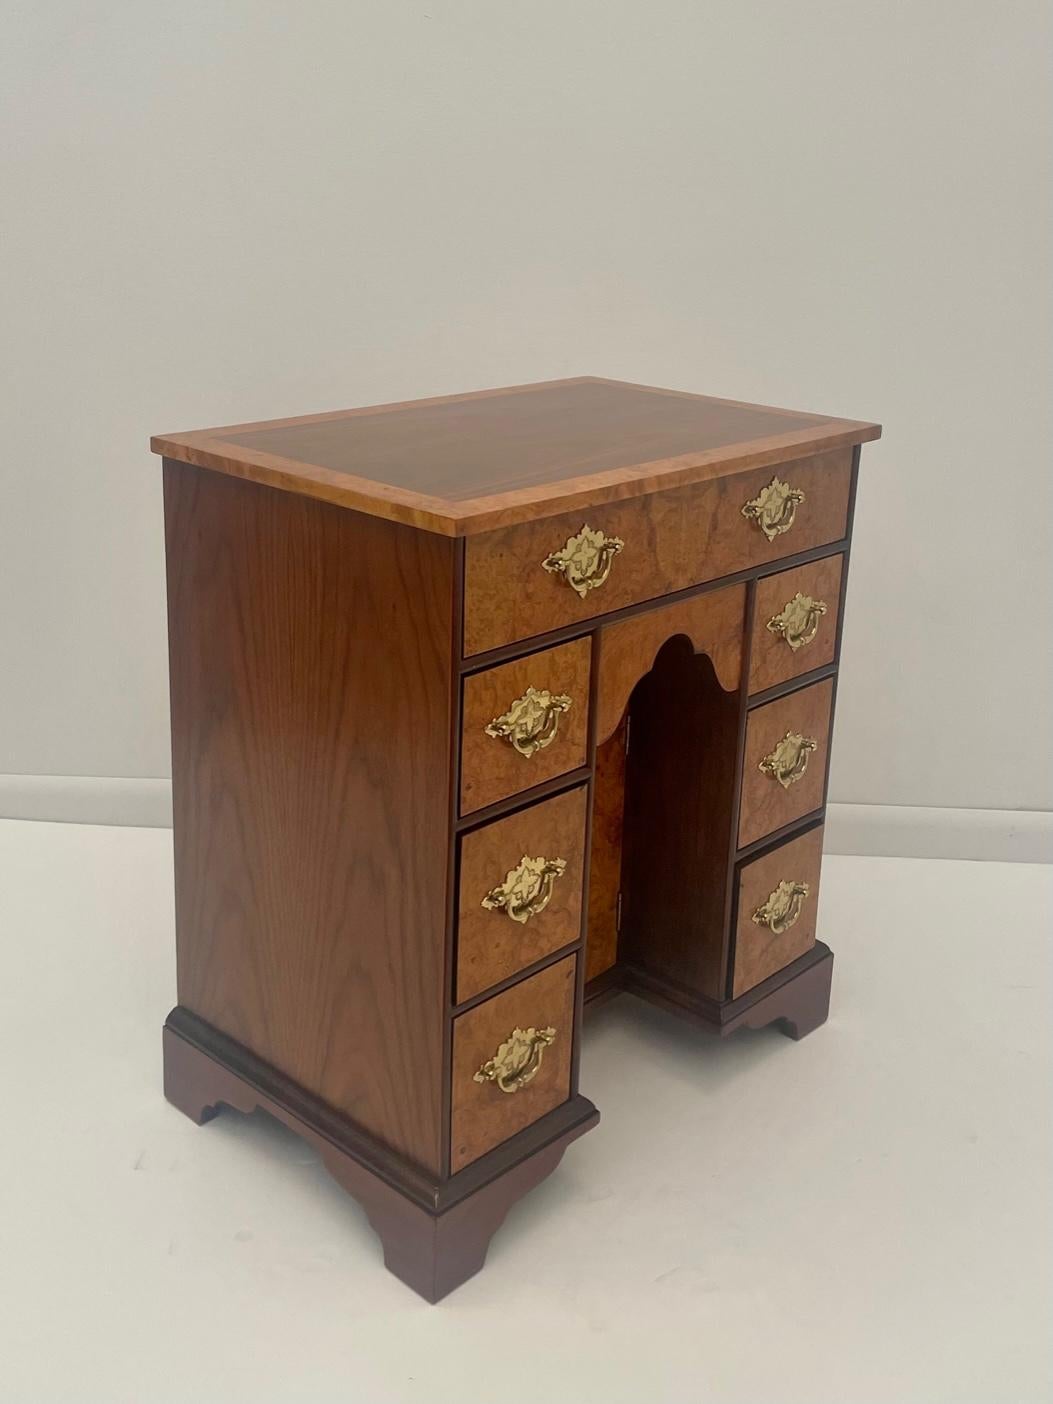 Gorgeous rich looking Baker Stately Home Collection Queen Anne style small chest or commode having walnut & burl veneer, 7 drawers, elegant brasses and little door in the recessed center for secret storage.  Chest is modeled after one in an English